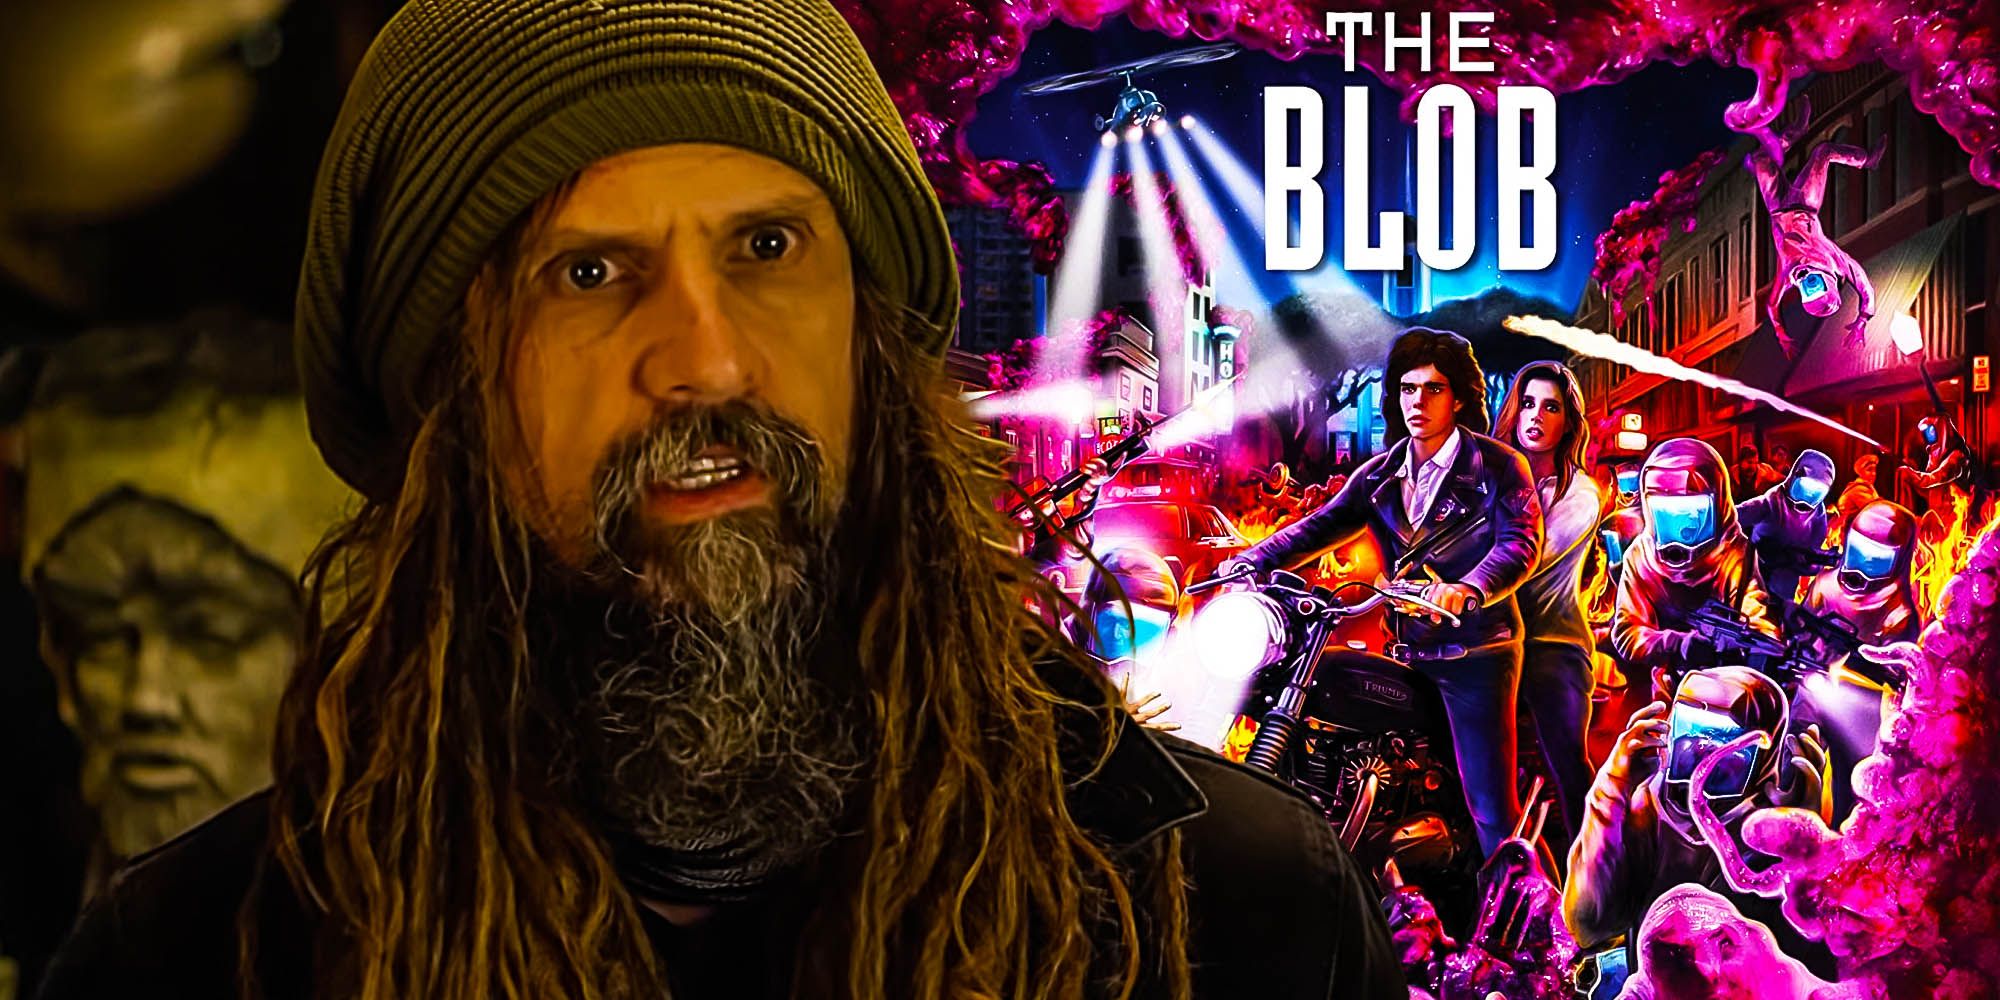 Rob Zombie unmade the blob remake